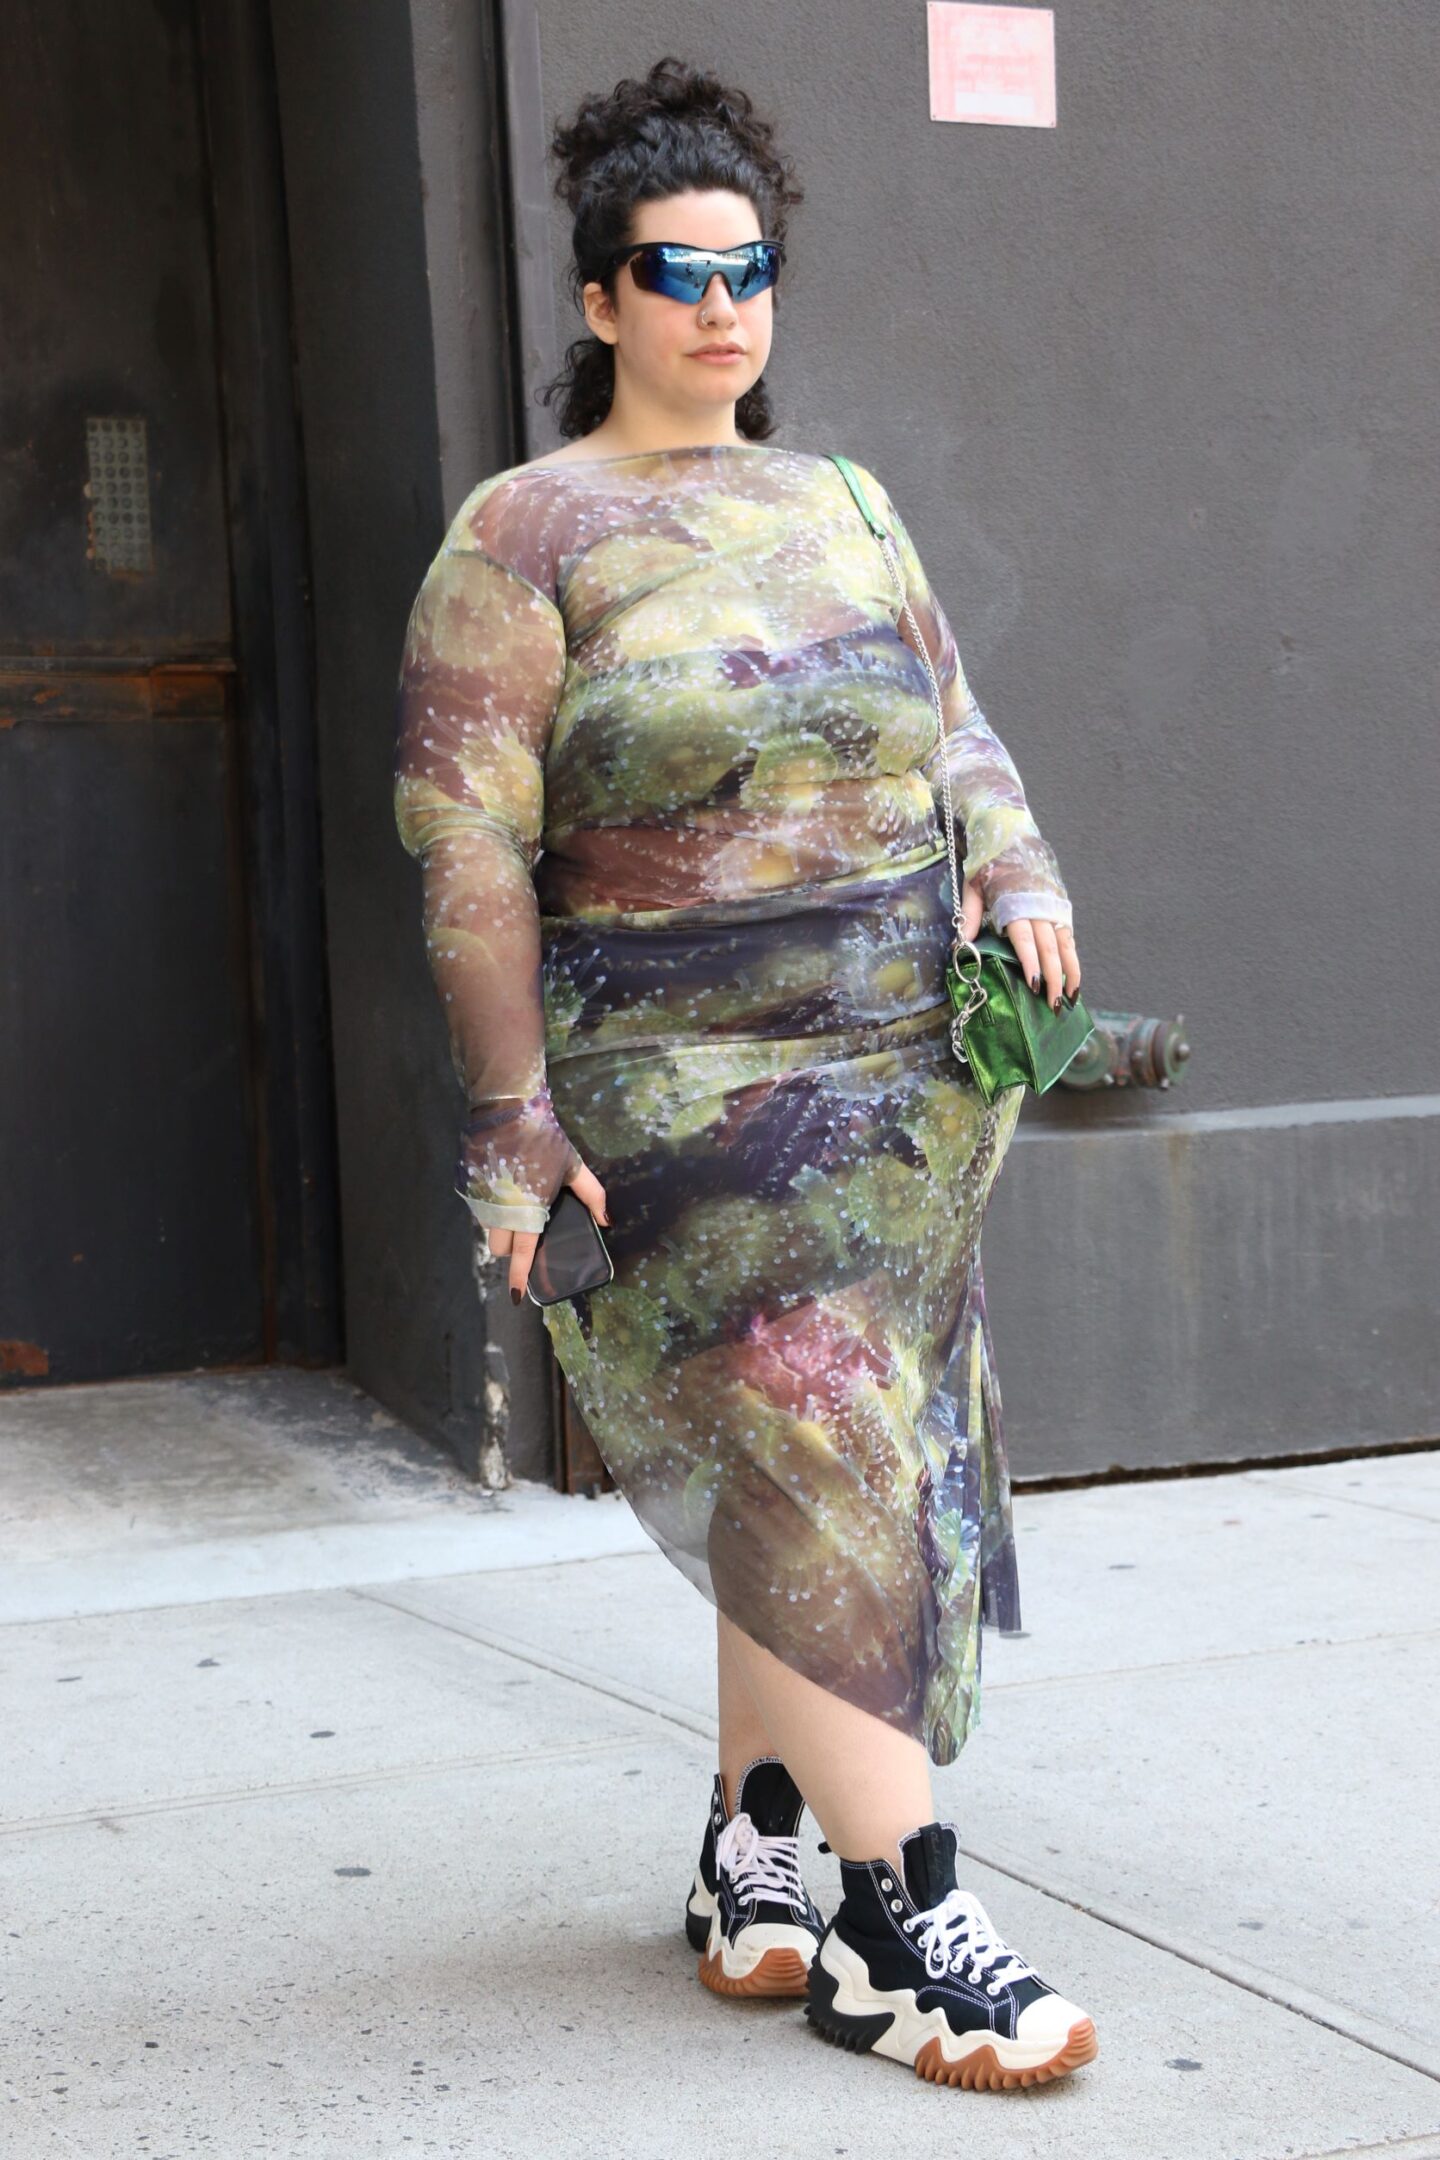 cosmic sheer mesh plus size dress as a street style outfit for plus size women.